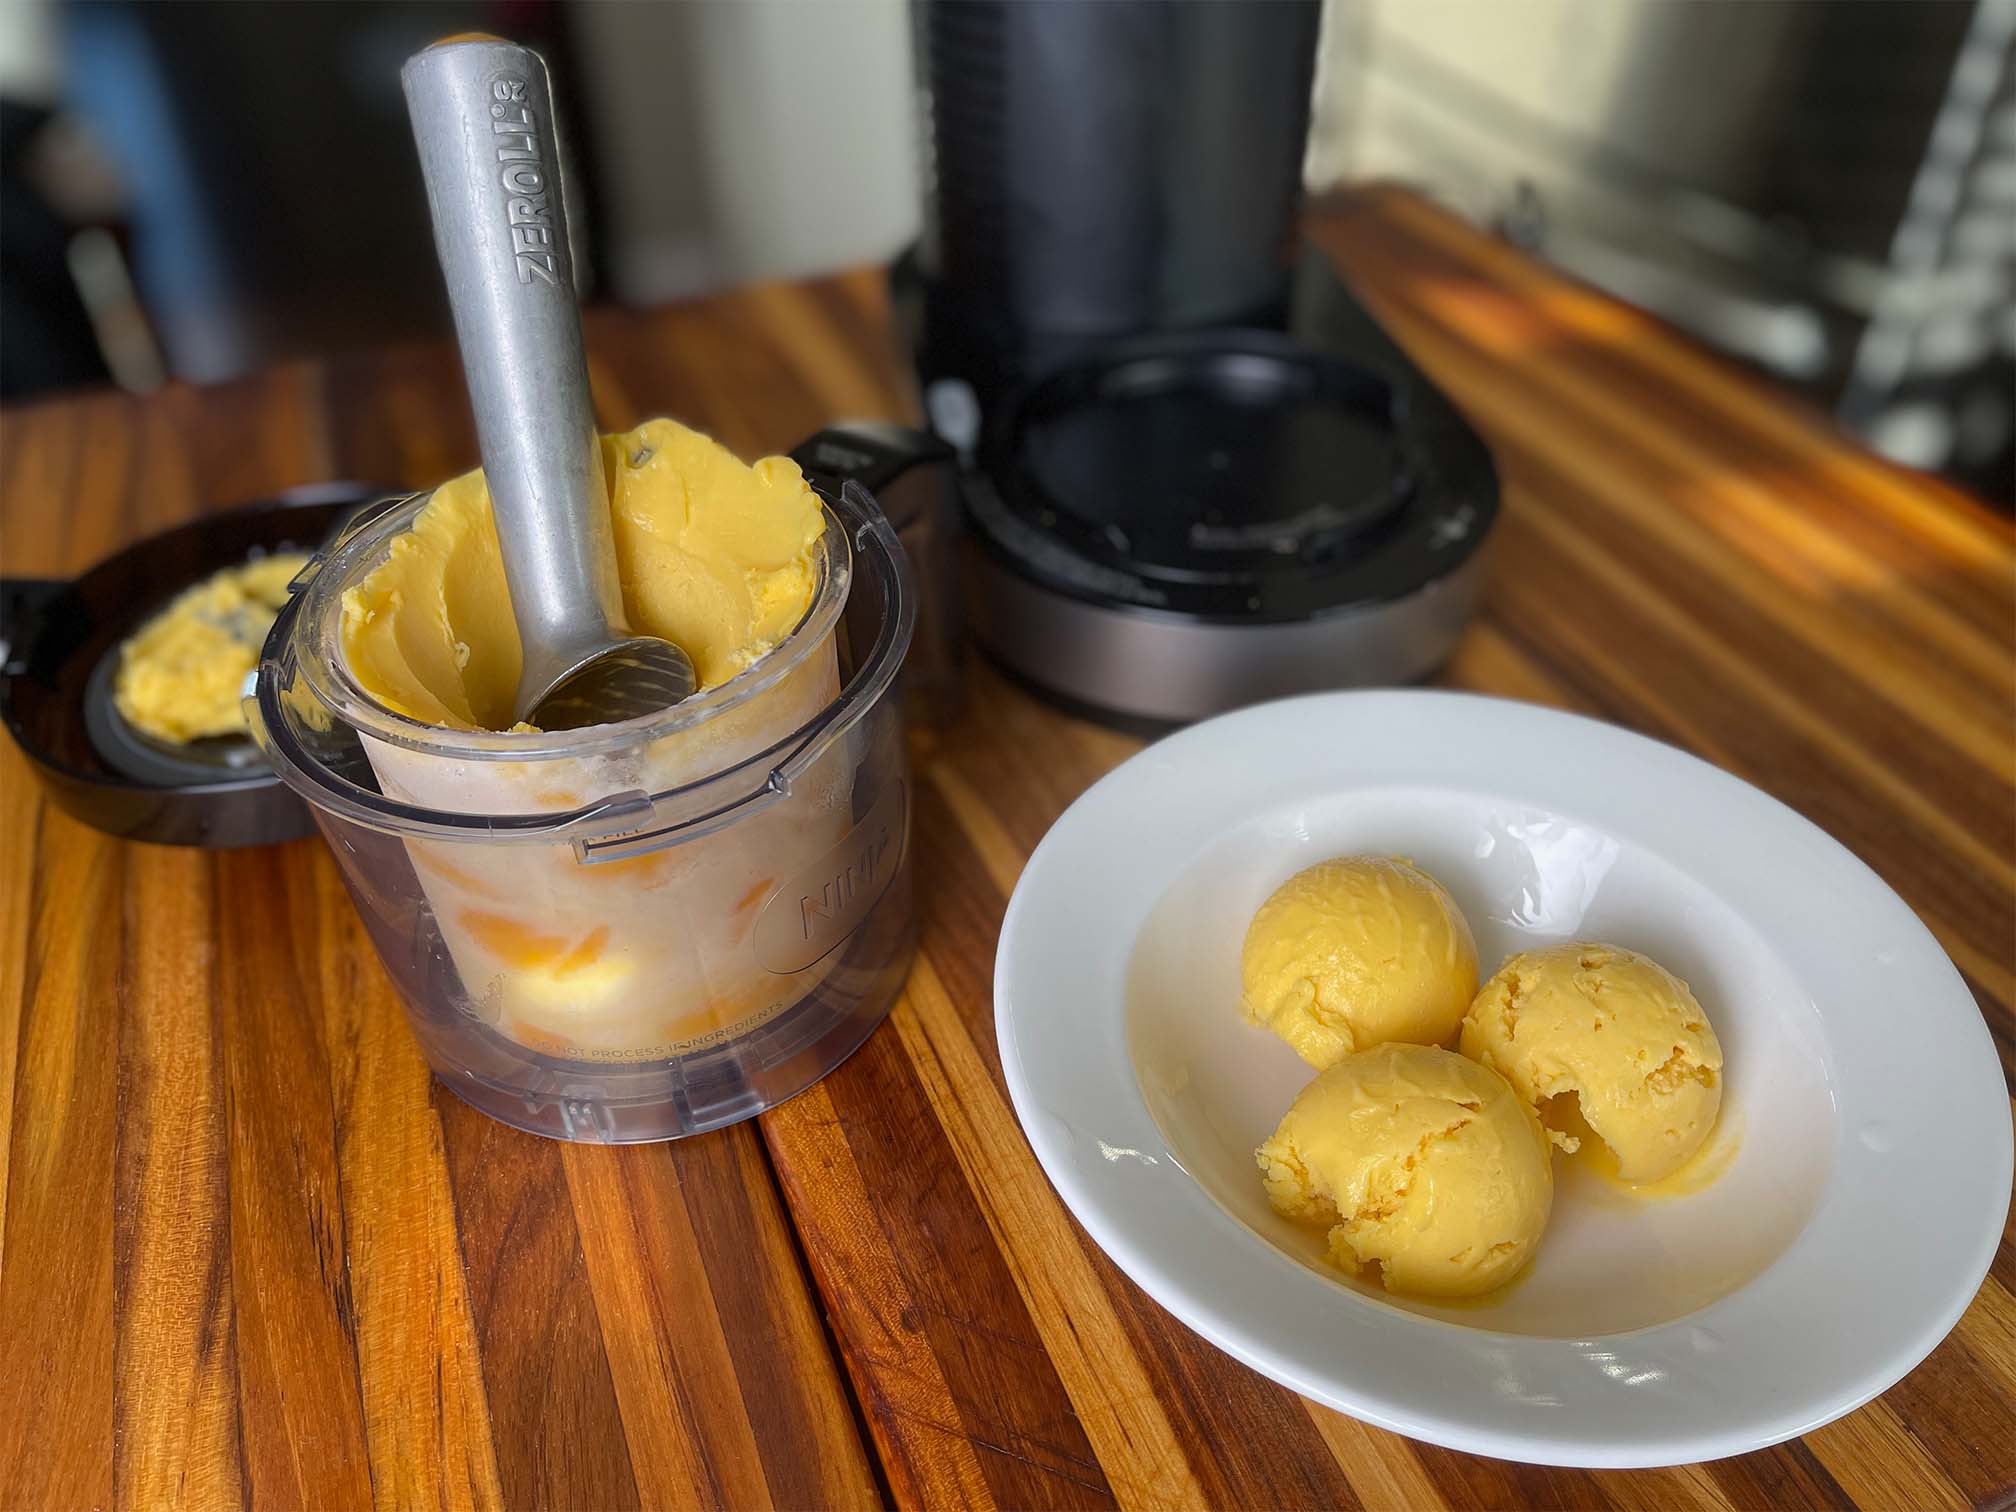 Ninja Creami Deluxe Review: Make Dreamy Frozen Treats at Home - CNET